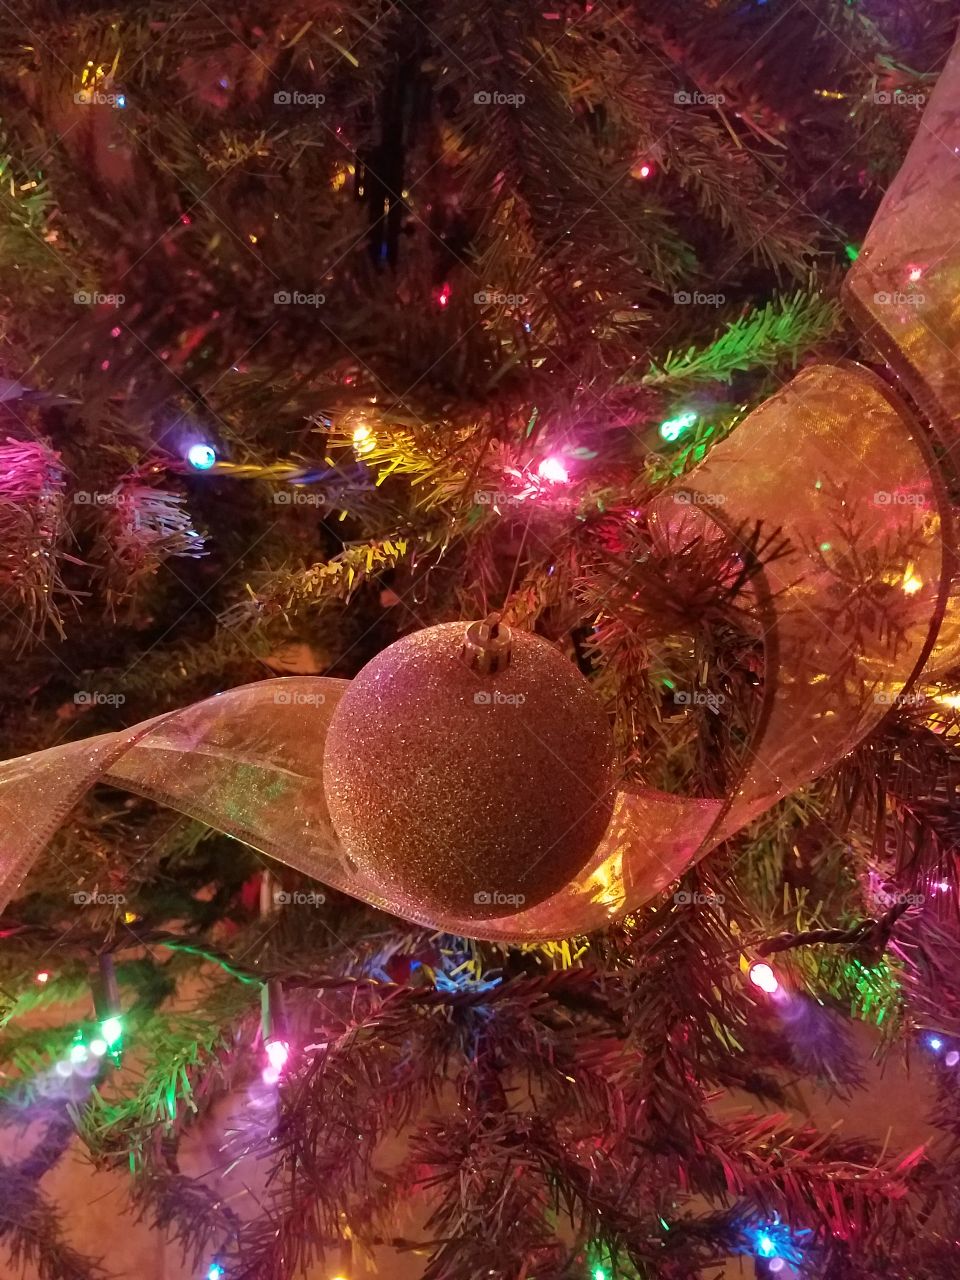 The glitter ornament and ribbon are so pretty with the lights glowing so brightly behind them. Love looking at Christmas trees when they are lit up so bright!